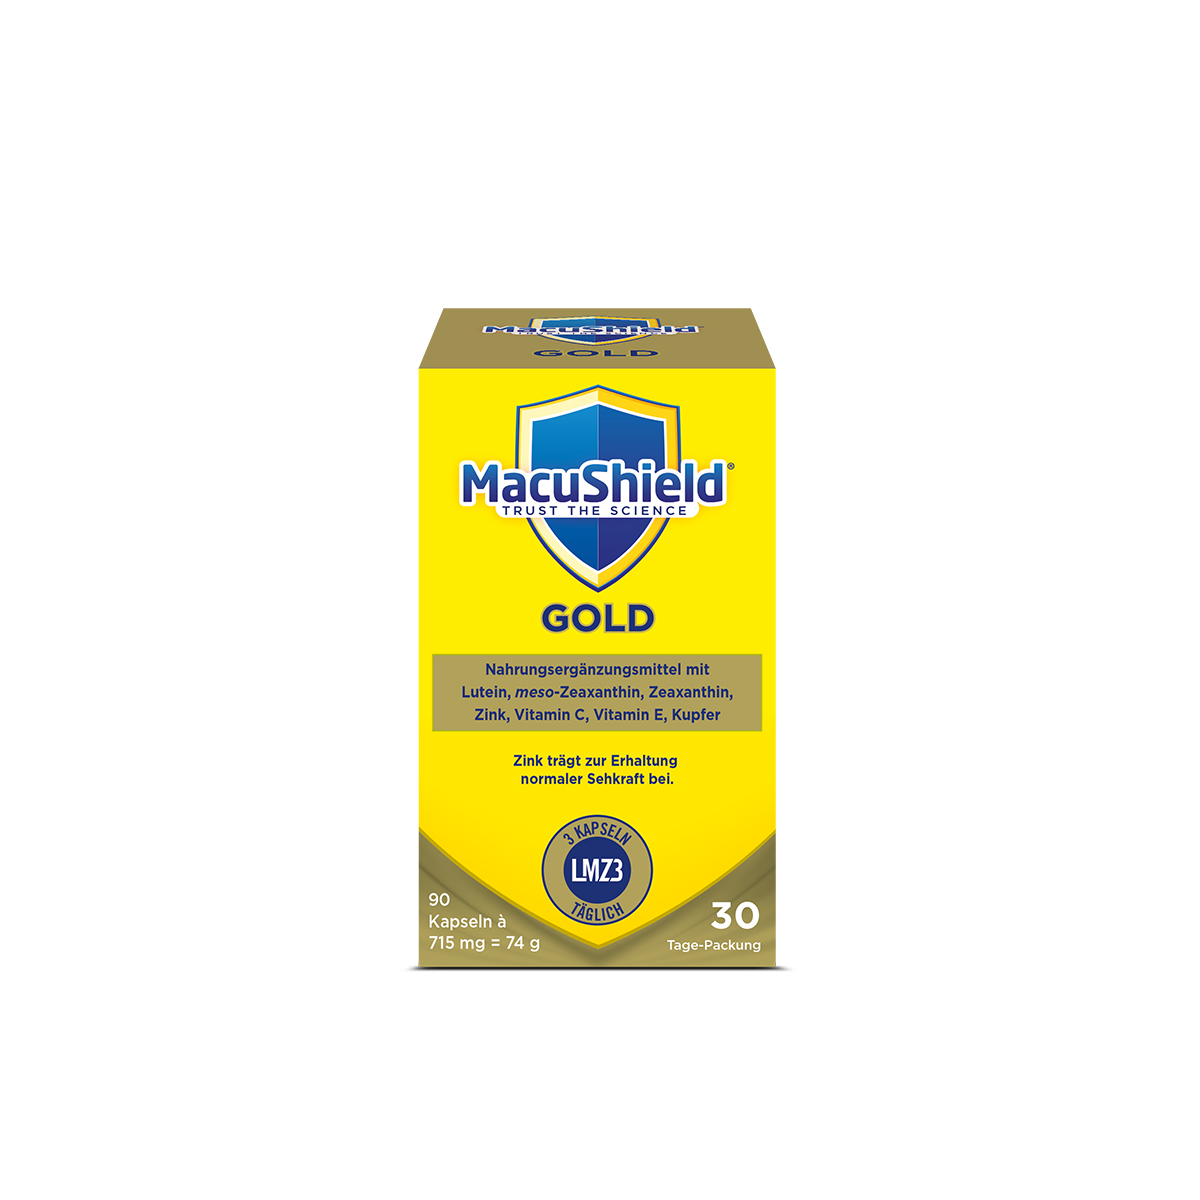 Featured image for “MACUSHIELD GOLD”